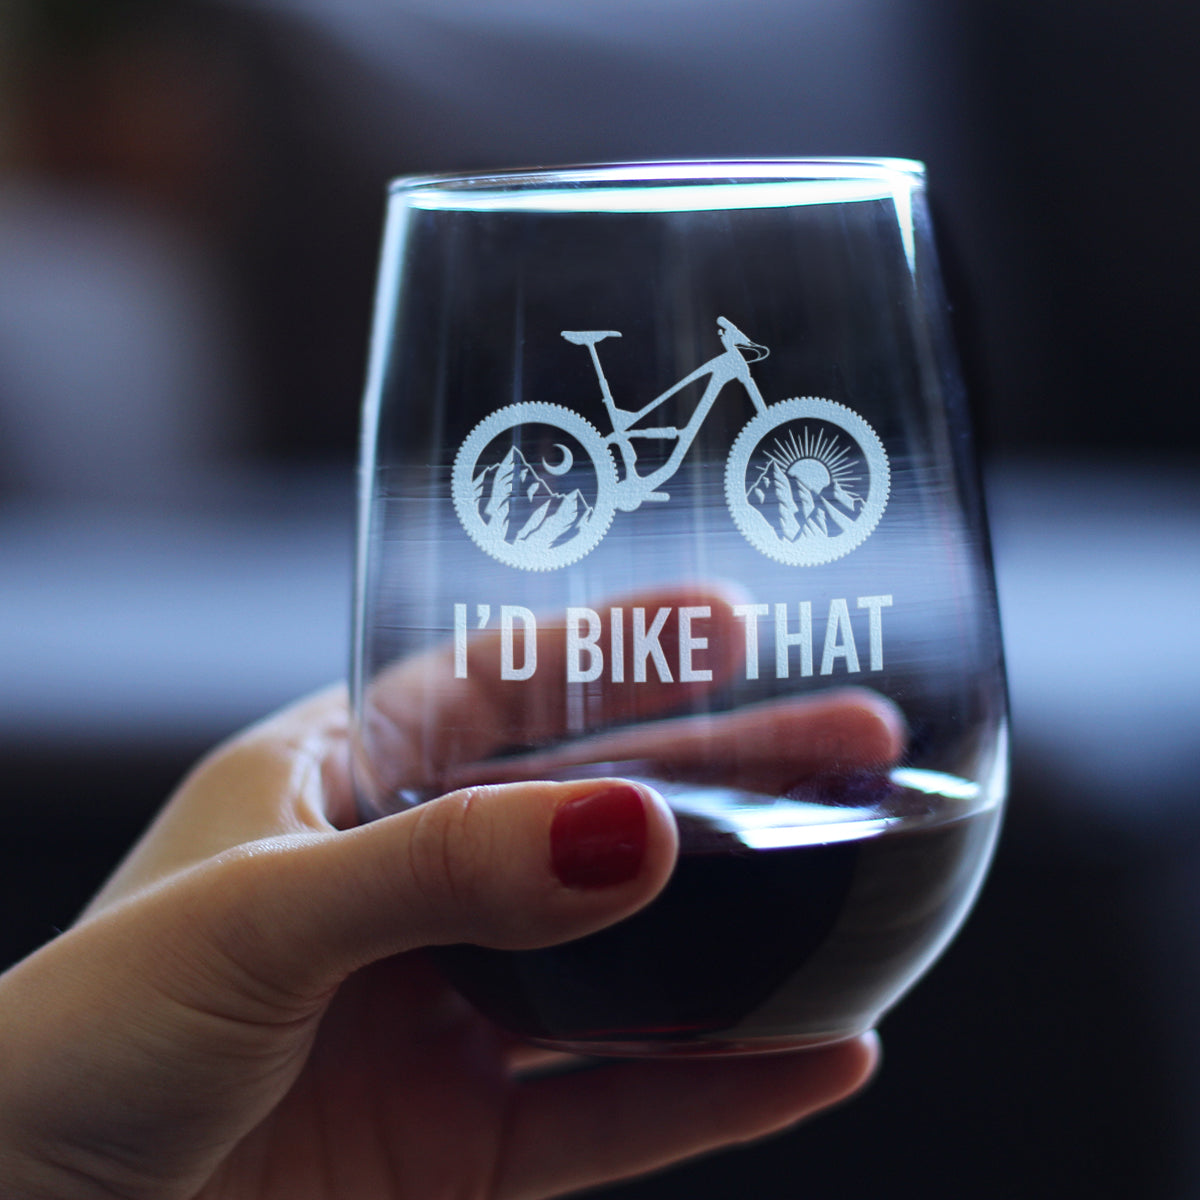 I&#39;d Bike That - Stemless Wine Glass - Bicycle Themed Decor and Gifts for Outdoor Lovers - Large 17 Oz Glasses